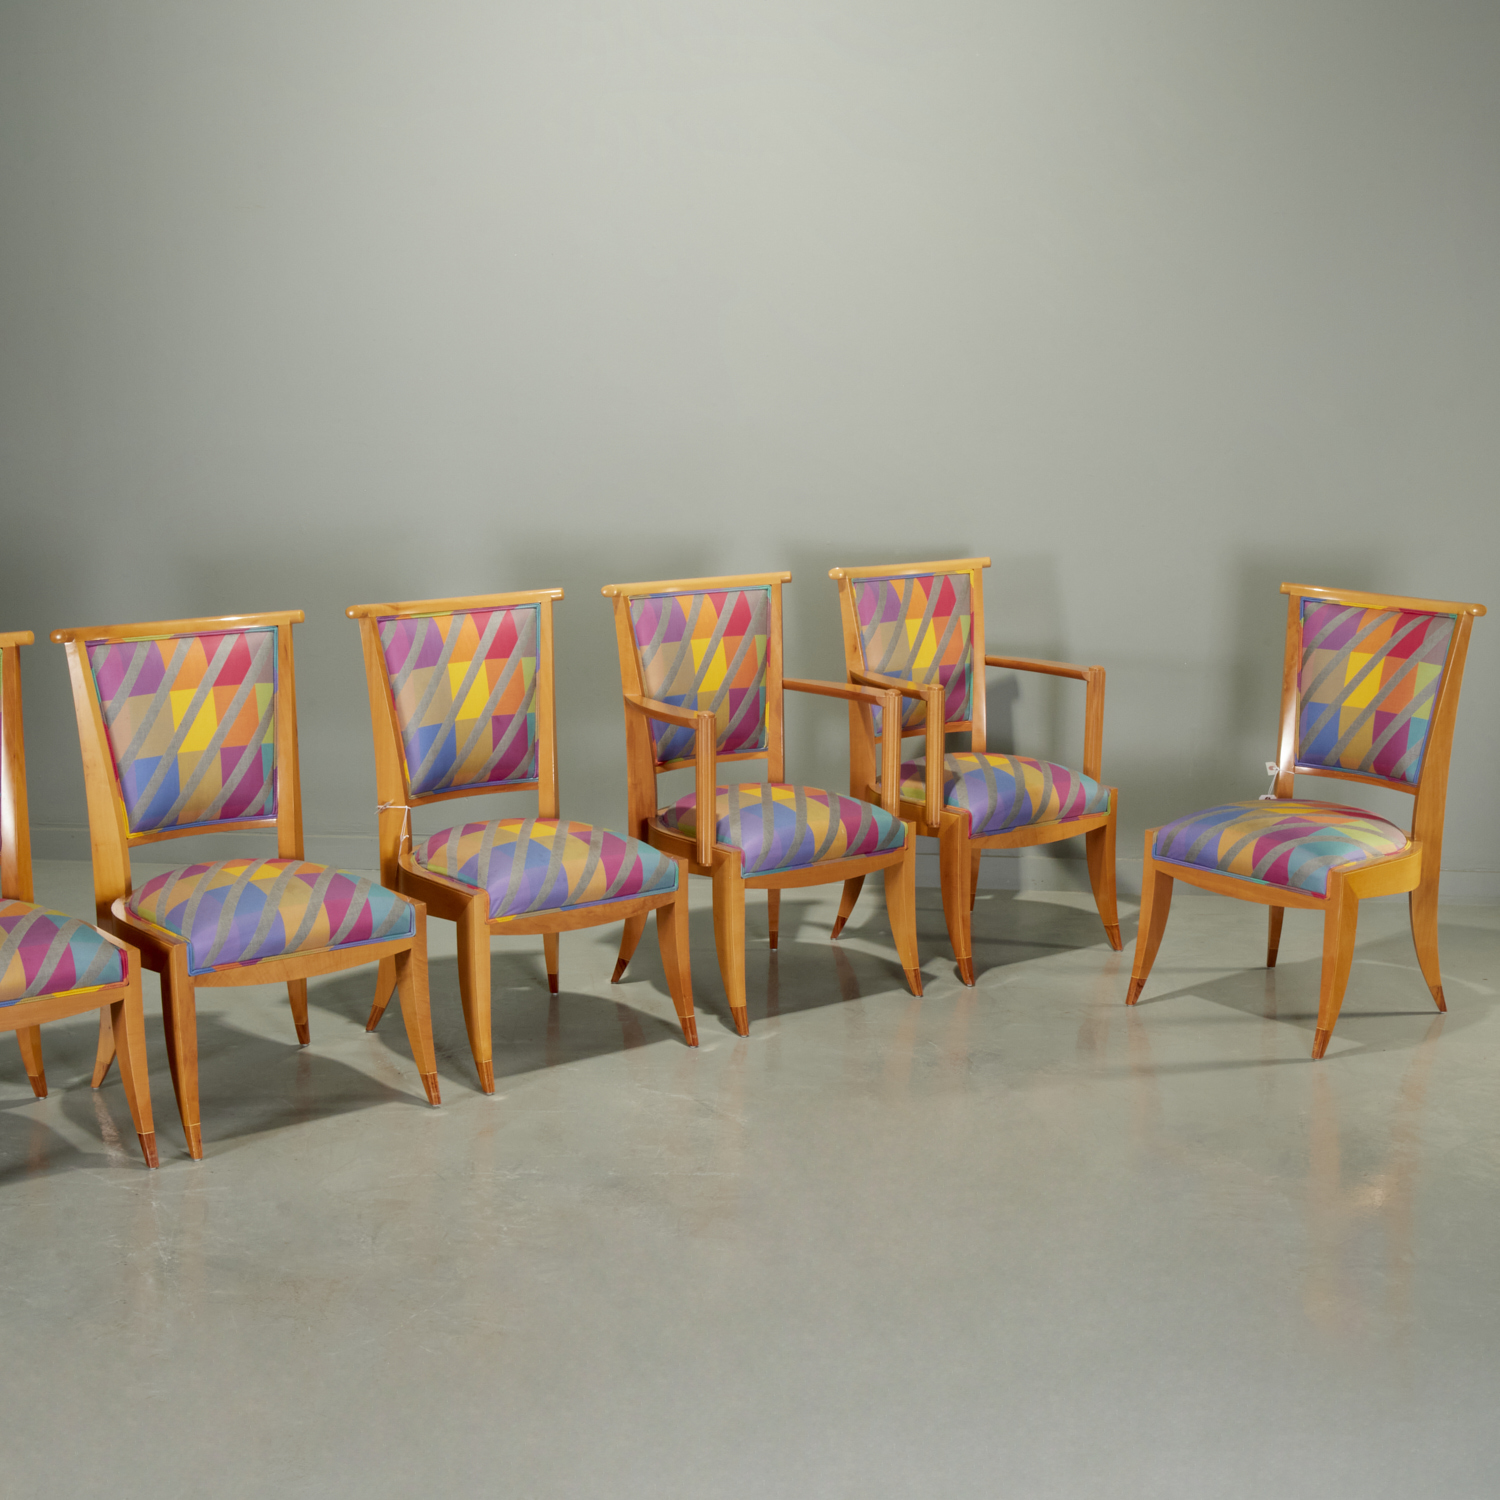 RON PUCKETT, DINING CHAIRS, EX-MUSEUM